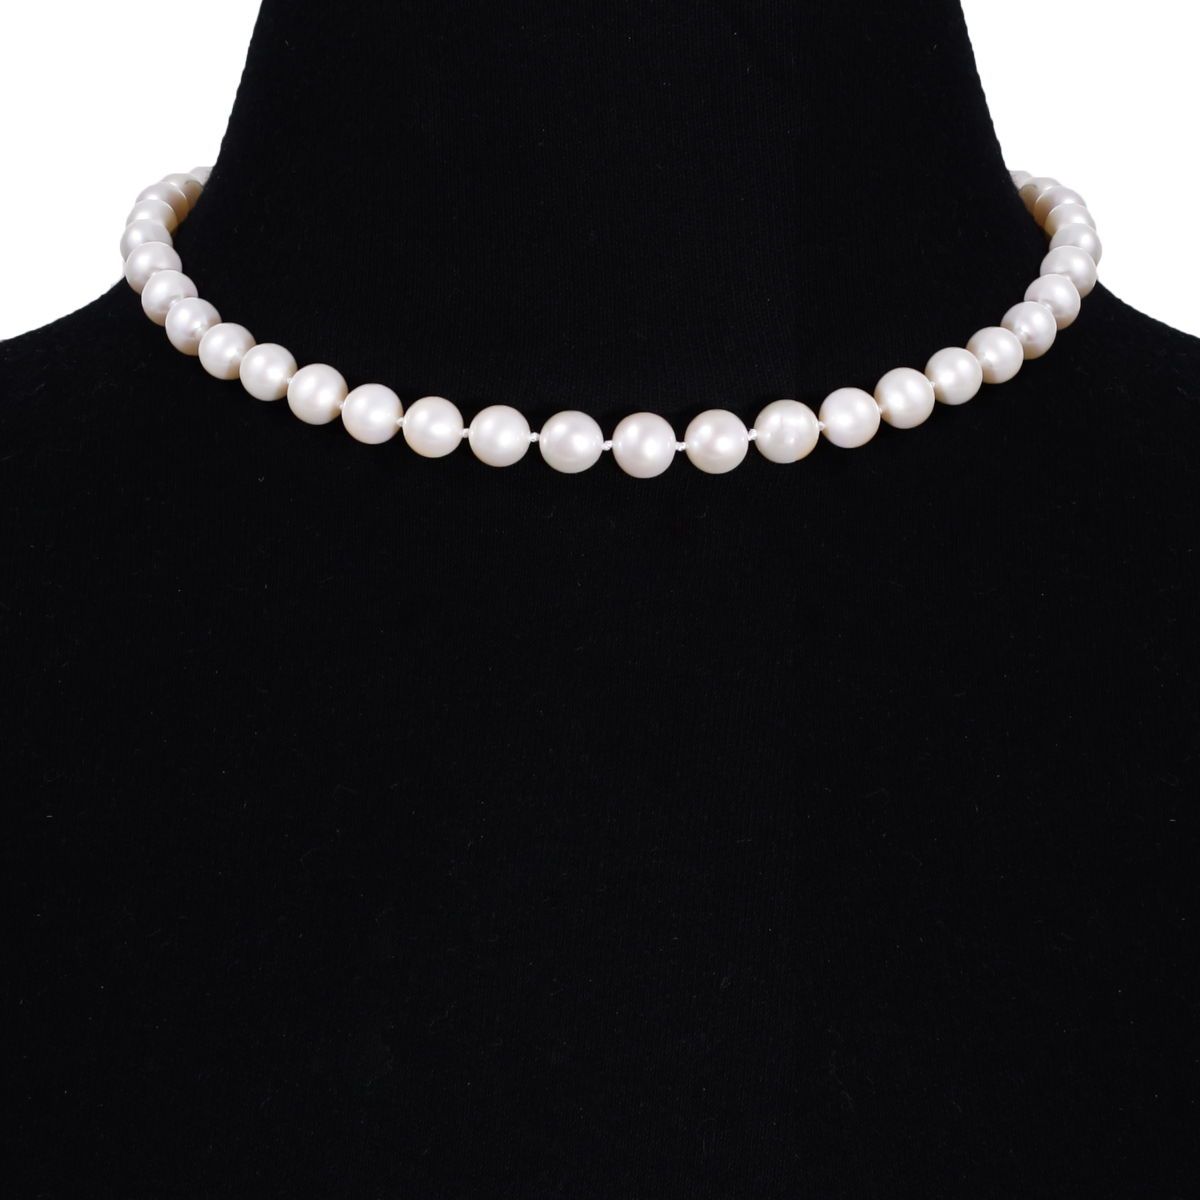 16 pearl necklace